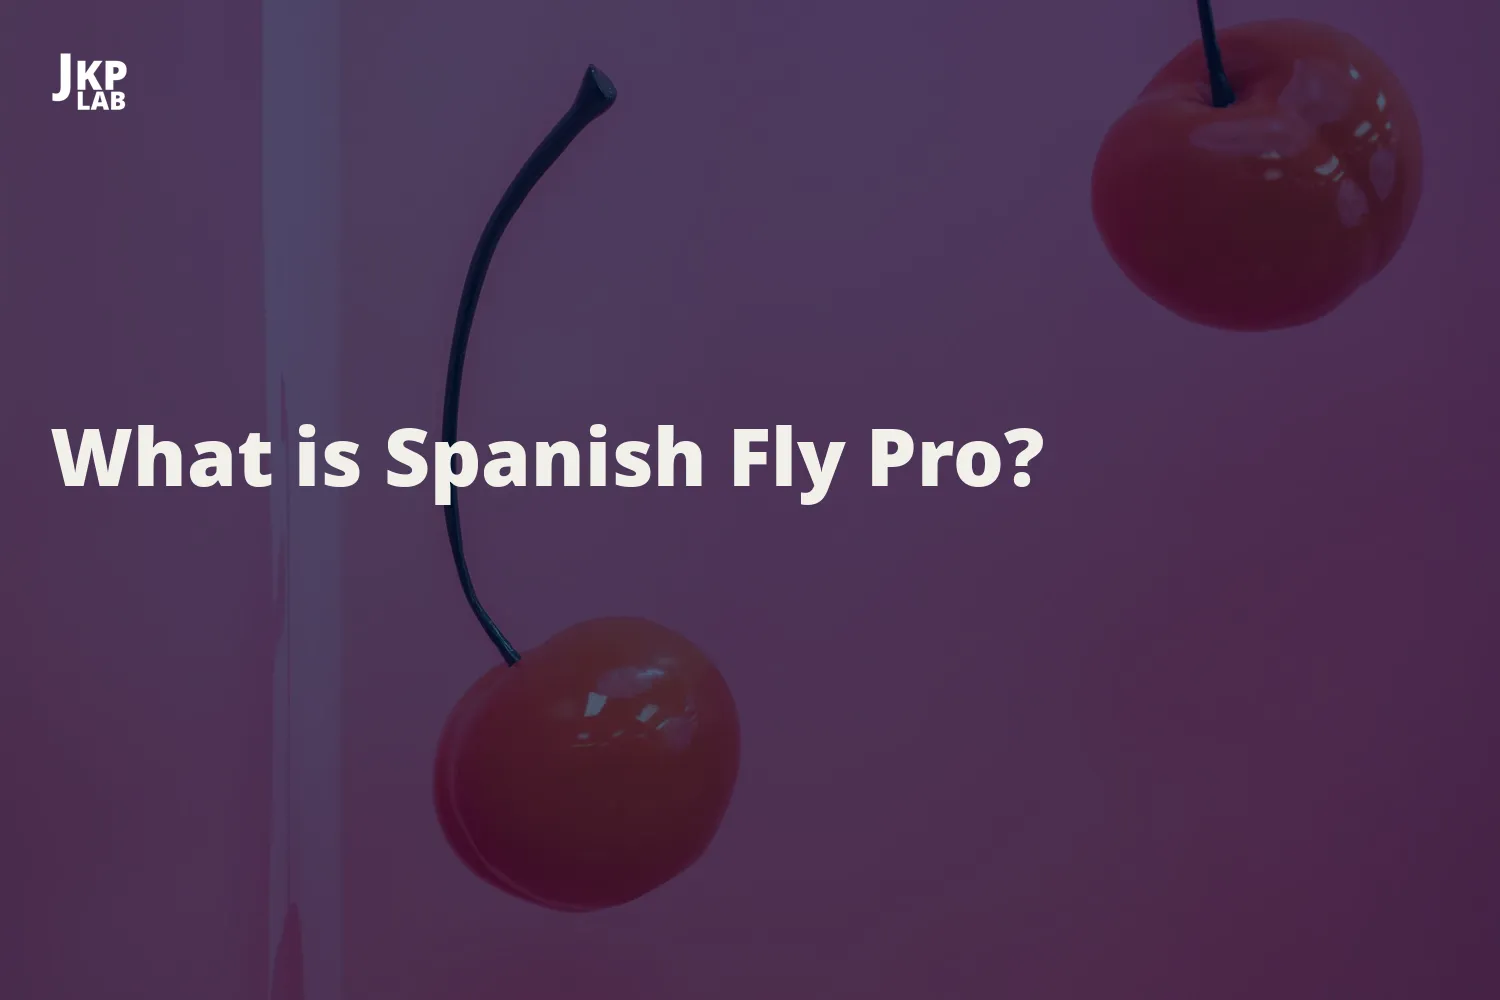 Spanish Fly and its Role in Boosting Fertility